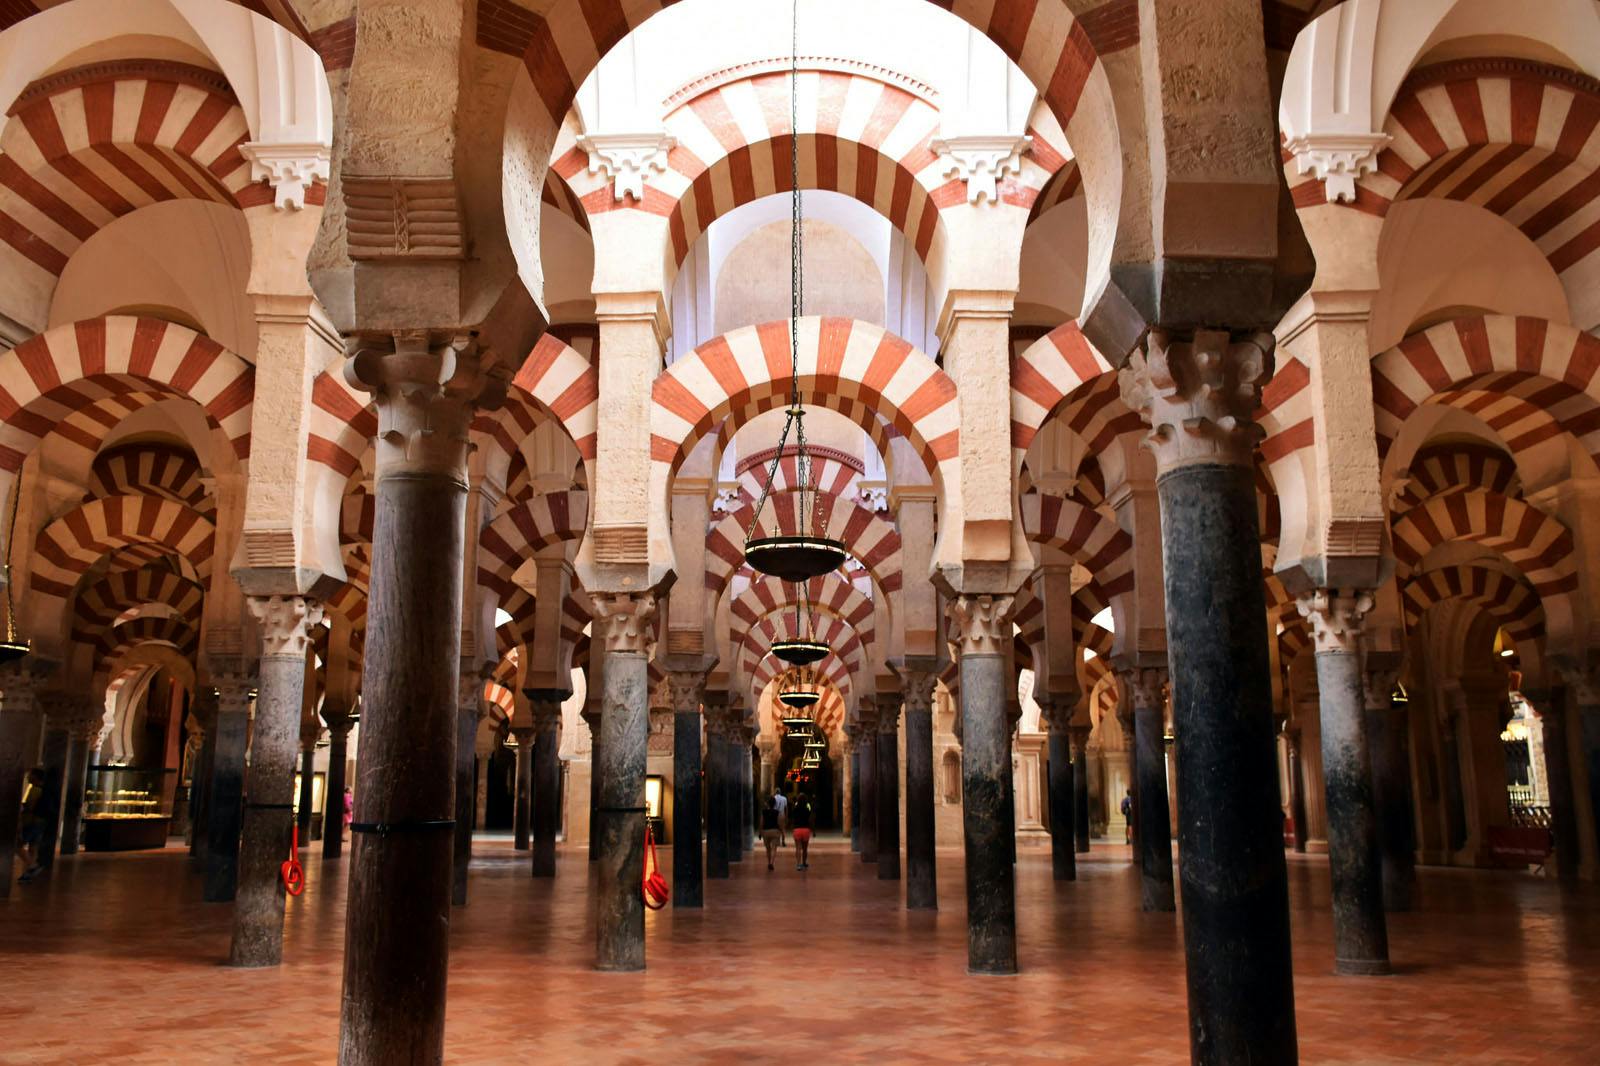 Guided visit of the Great Mosque Córdoba. Musement